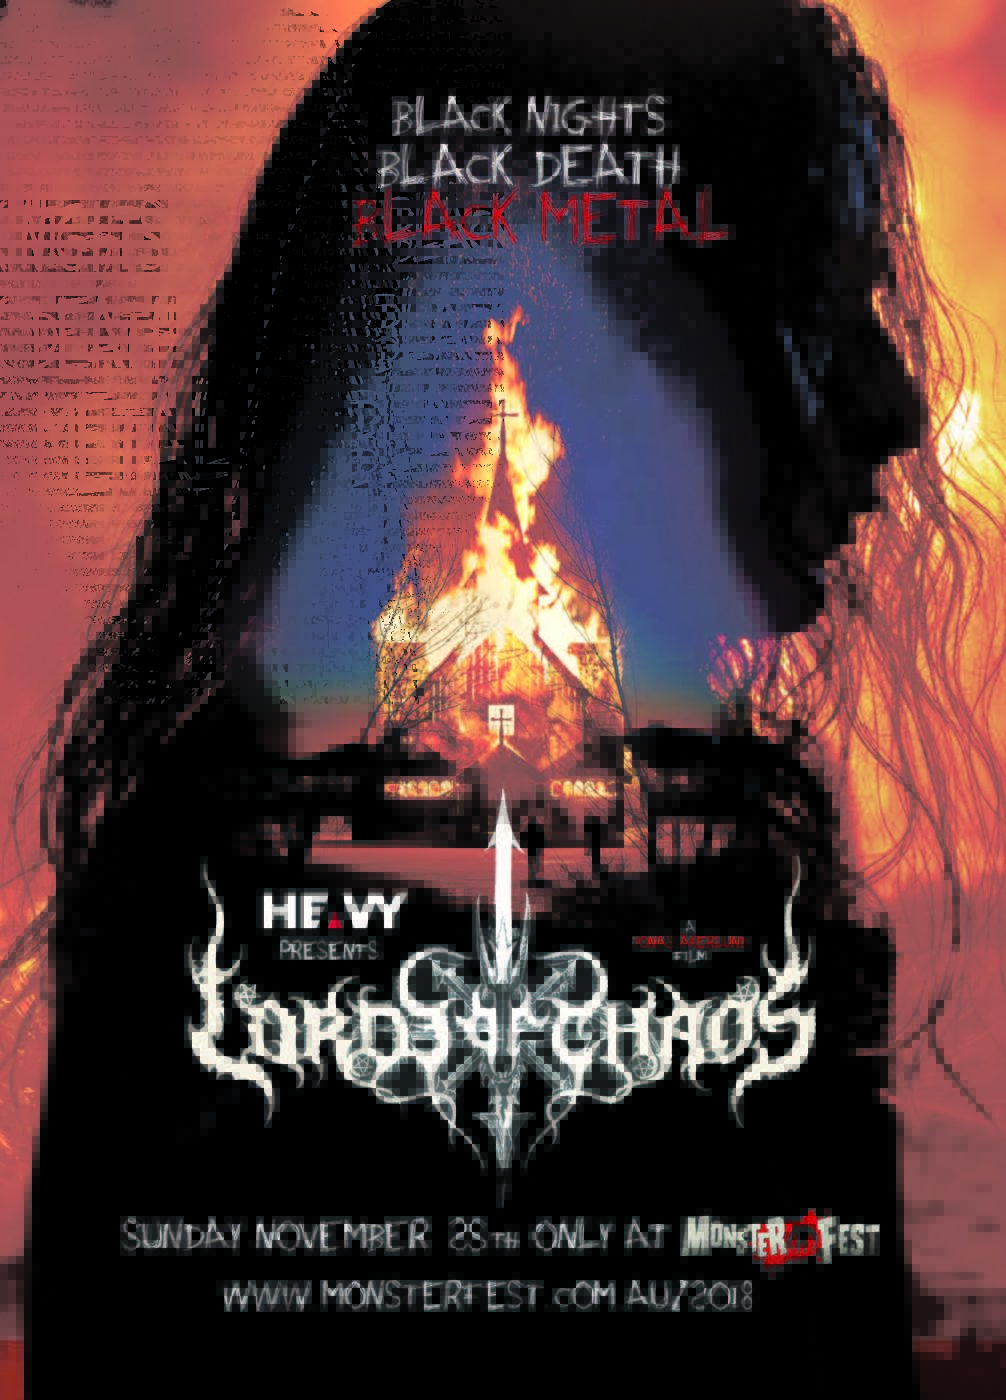 Lords Of Chaos Review: Norwegian Black Metal Comes To The Big Screen